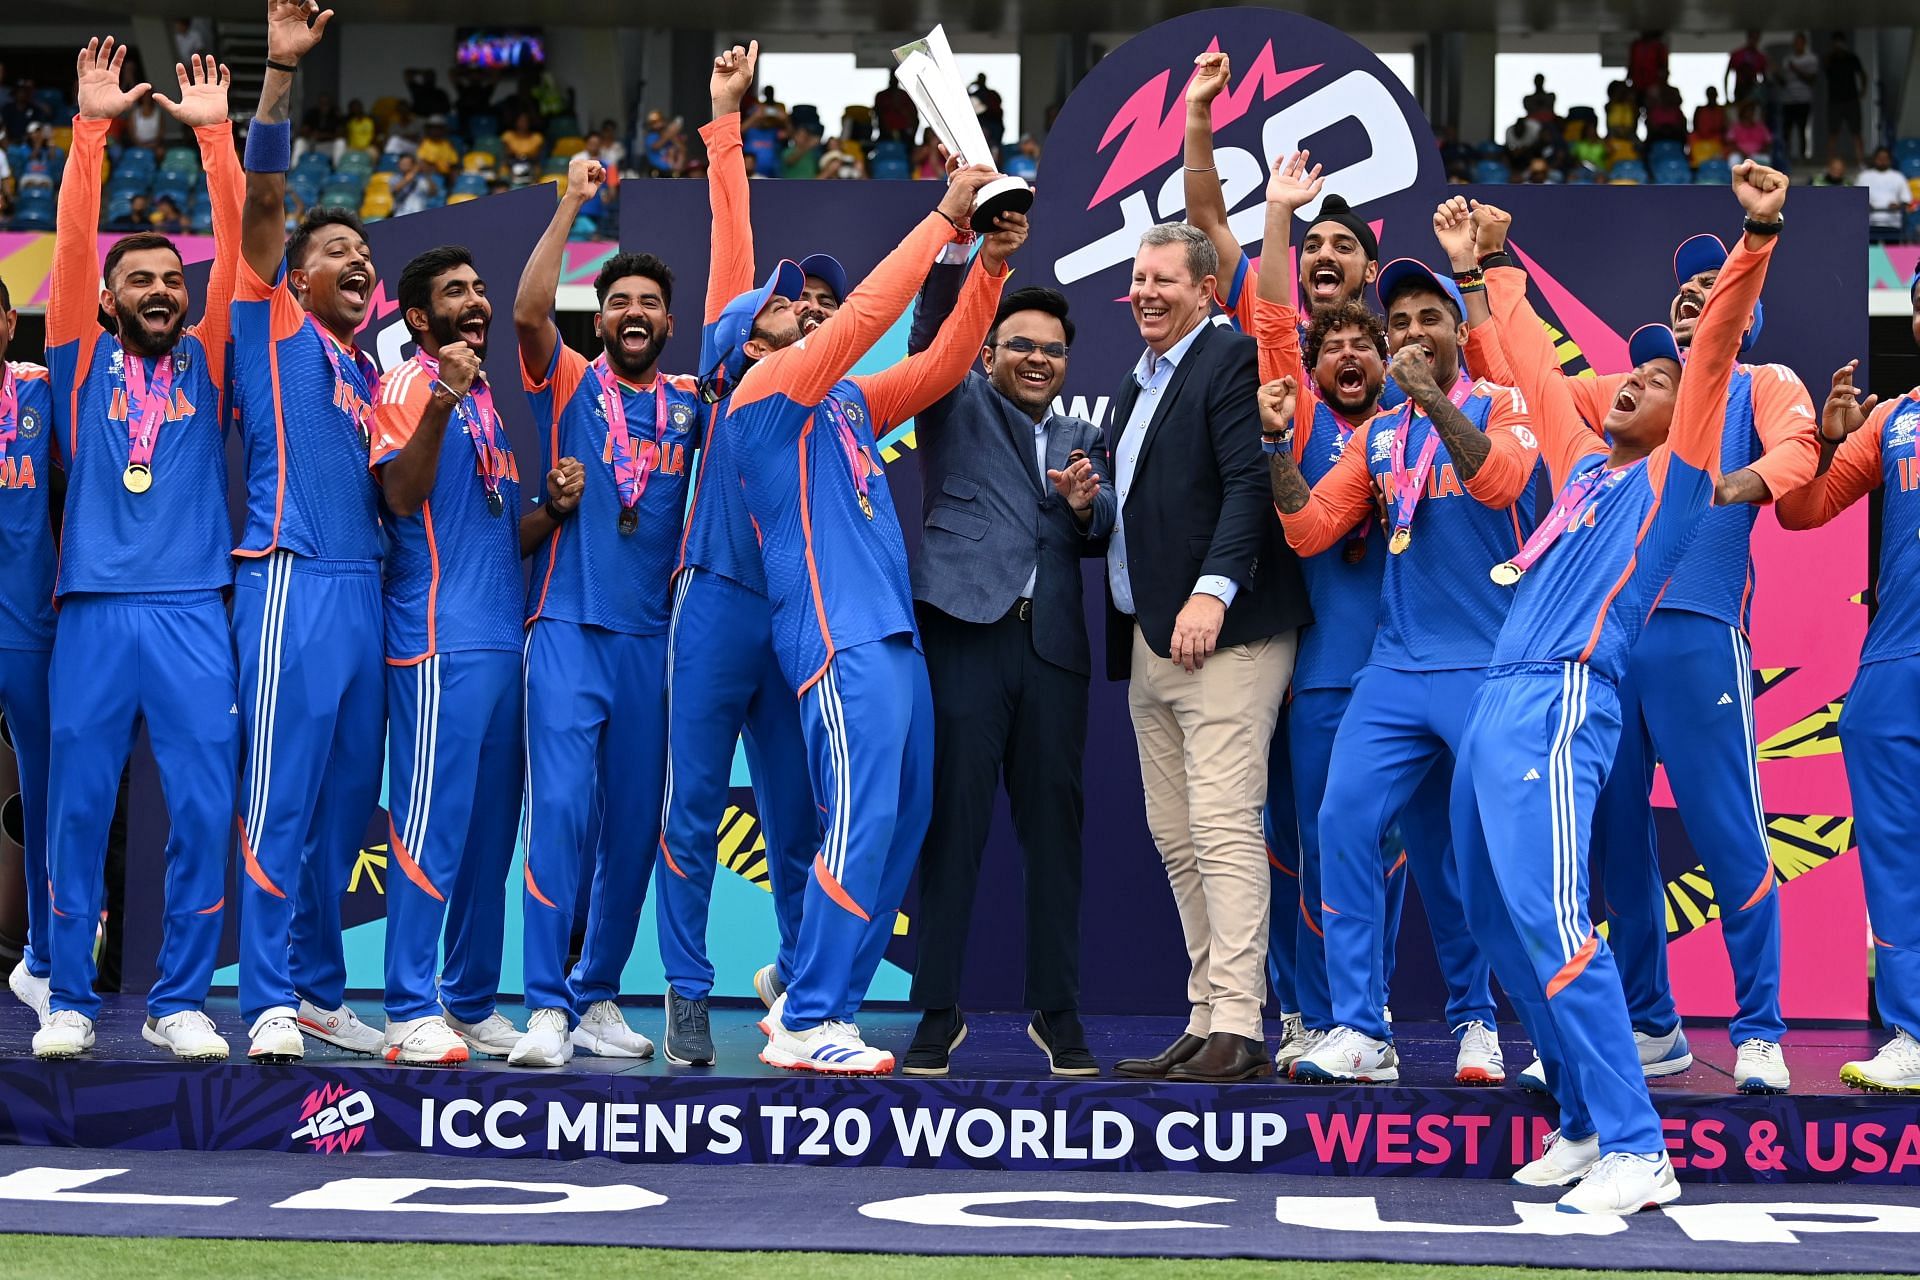 From 2007 to 2024, full list of ICC Men's T20 World Cup winners